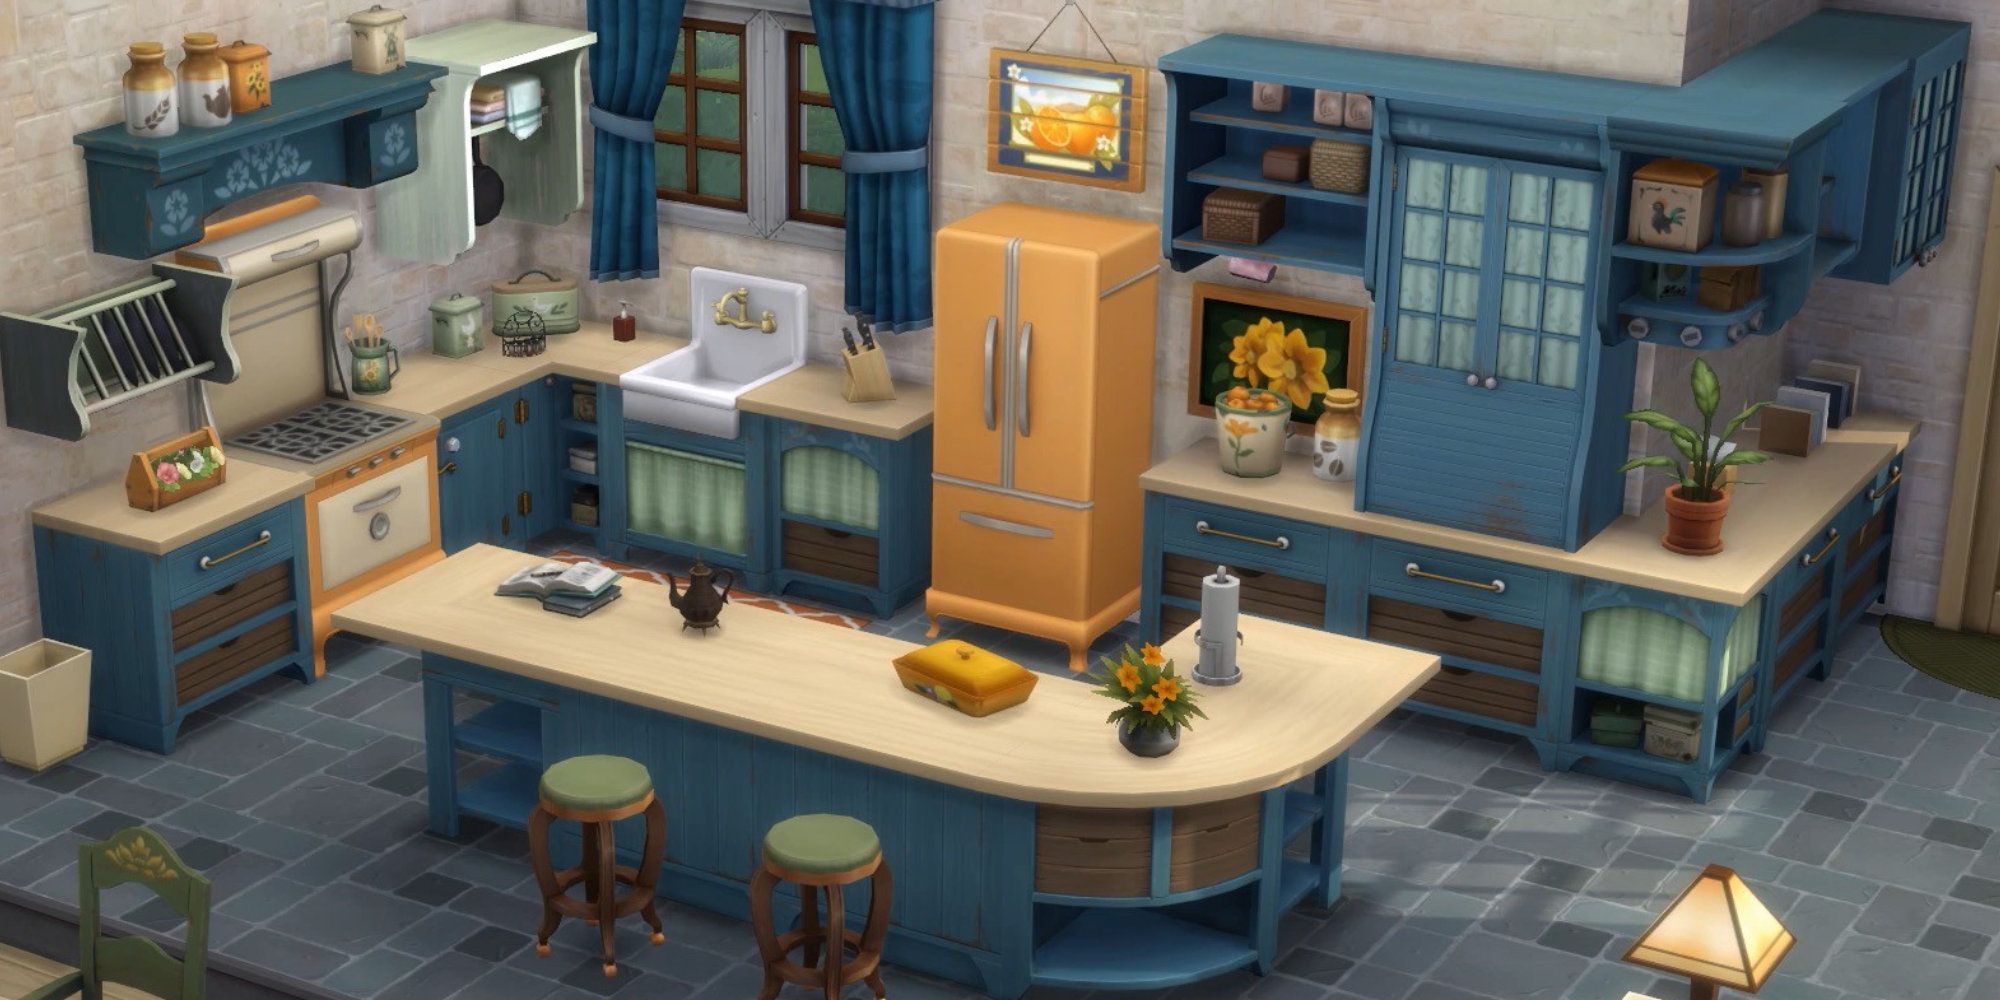 Sims 4 country kitchen kit kitchen design using all items